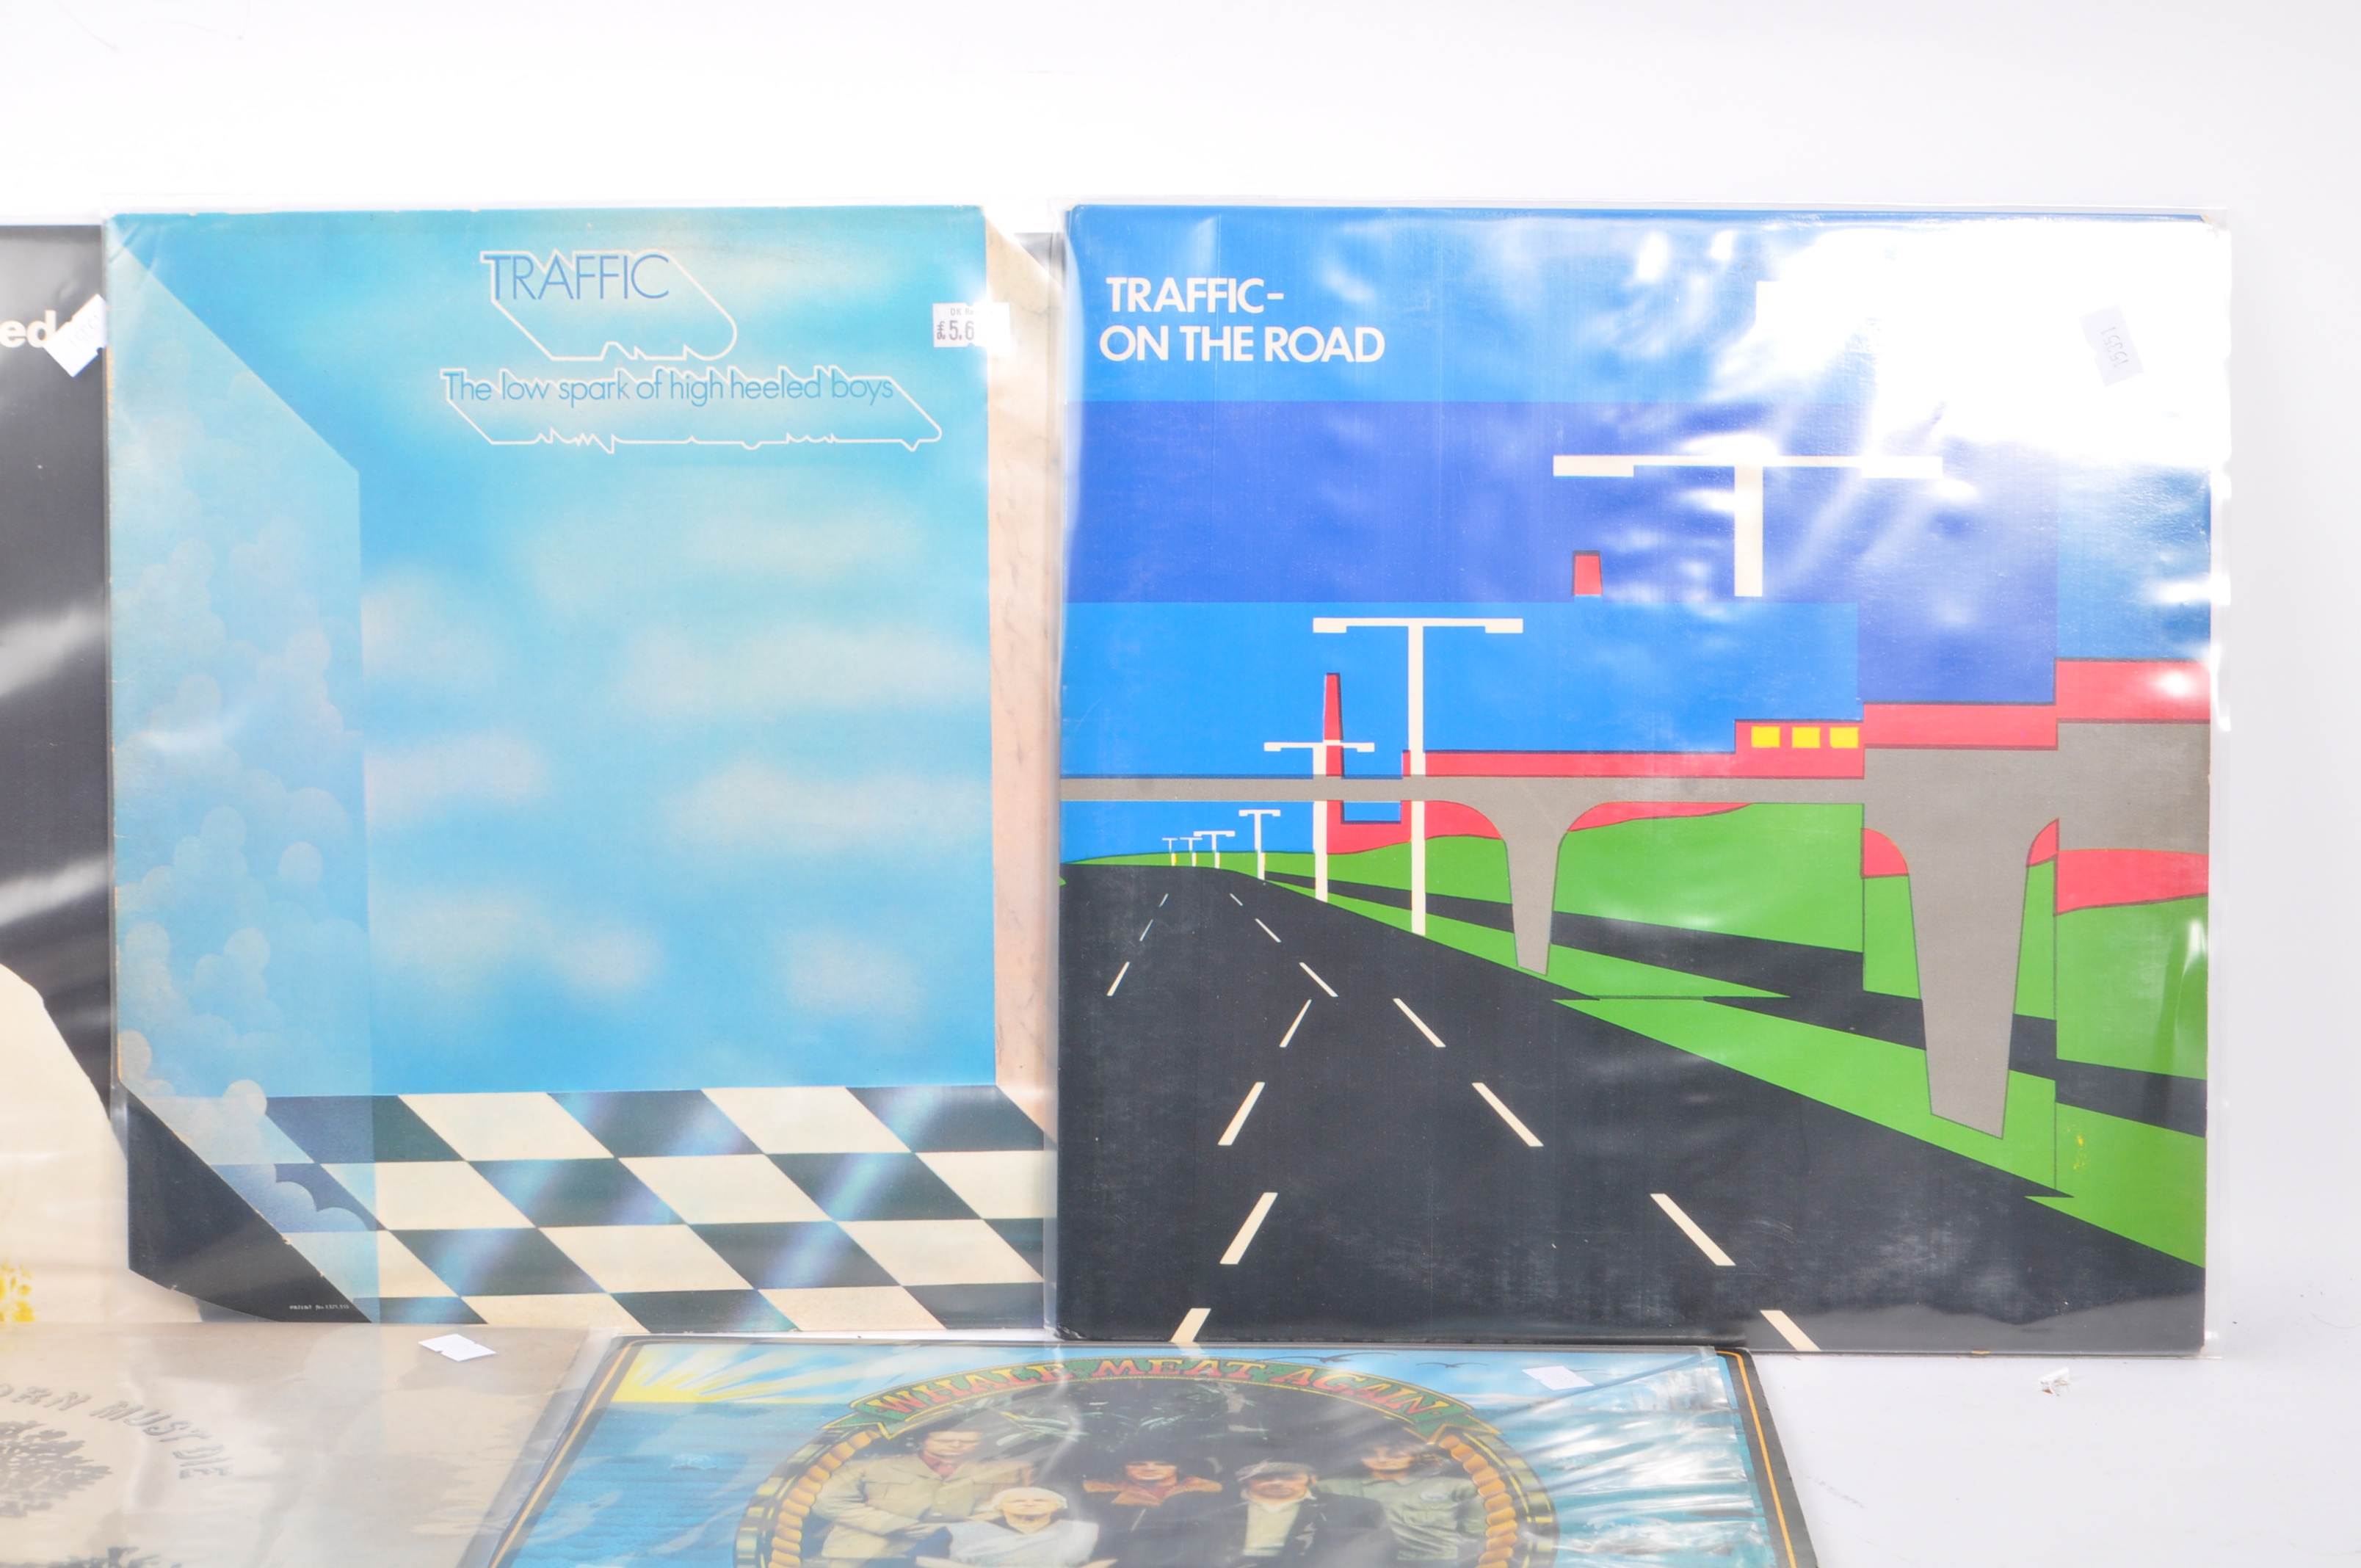 TRAFFIC / JIM CAPALDI - COLLECTION OF VINYL LP RECORD ALBUMS - Image 3 of 5